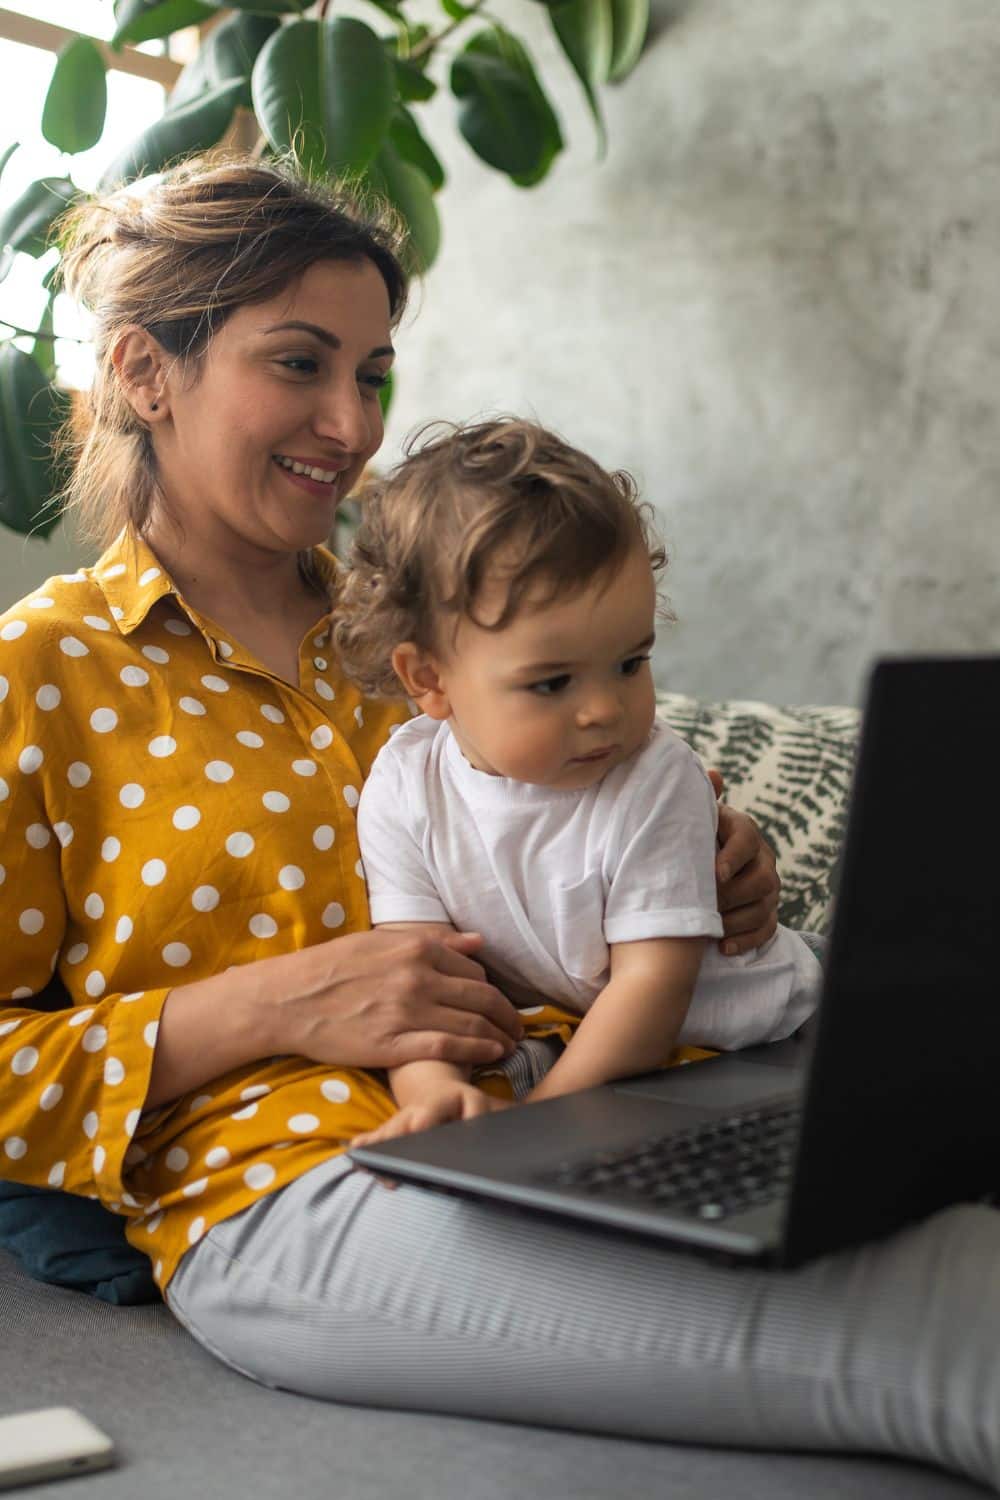 Making Money as a Stay-At-Home Mom 8 Real Ways